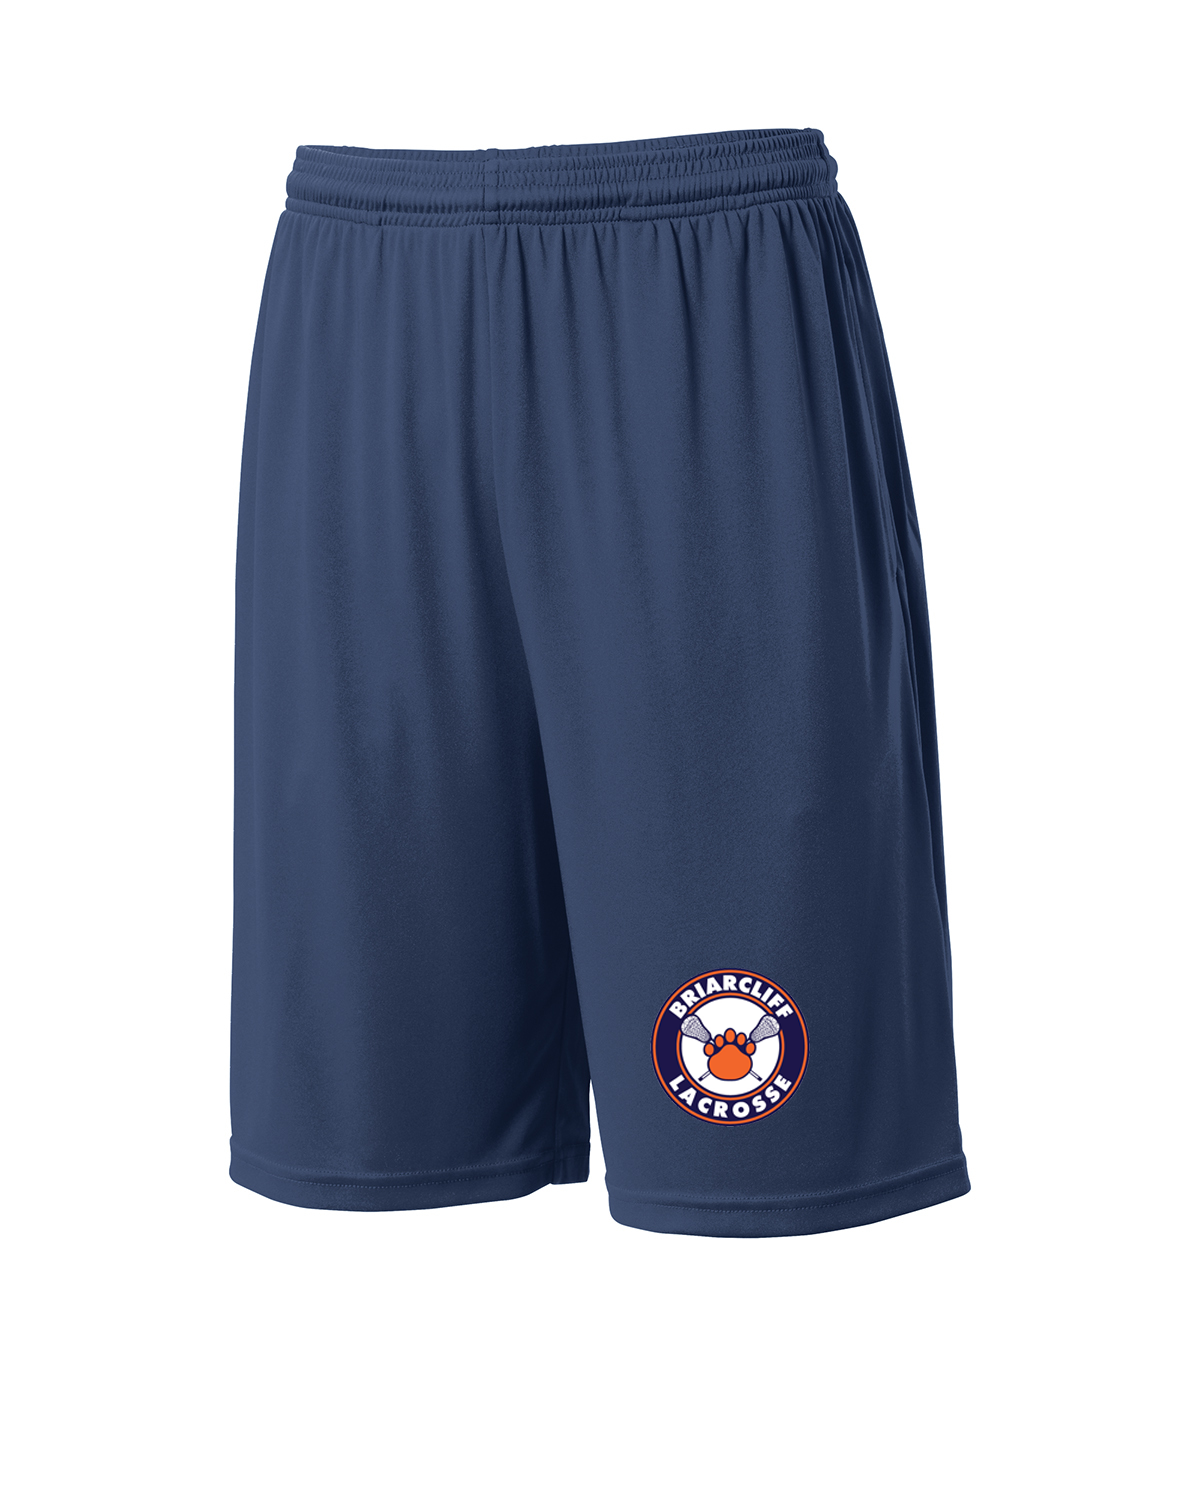 Briarcliff Lacrosse Navy Shorts